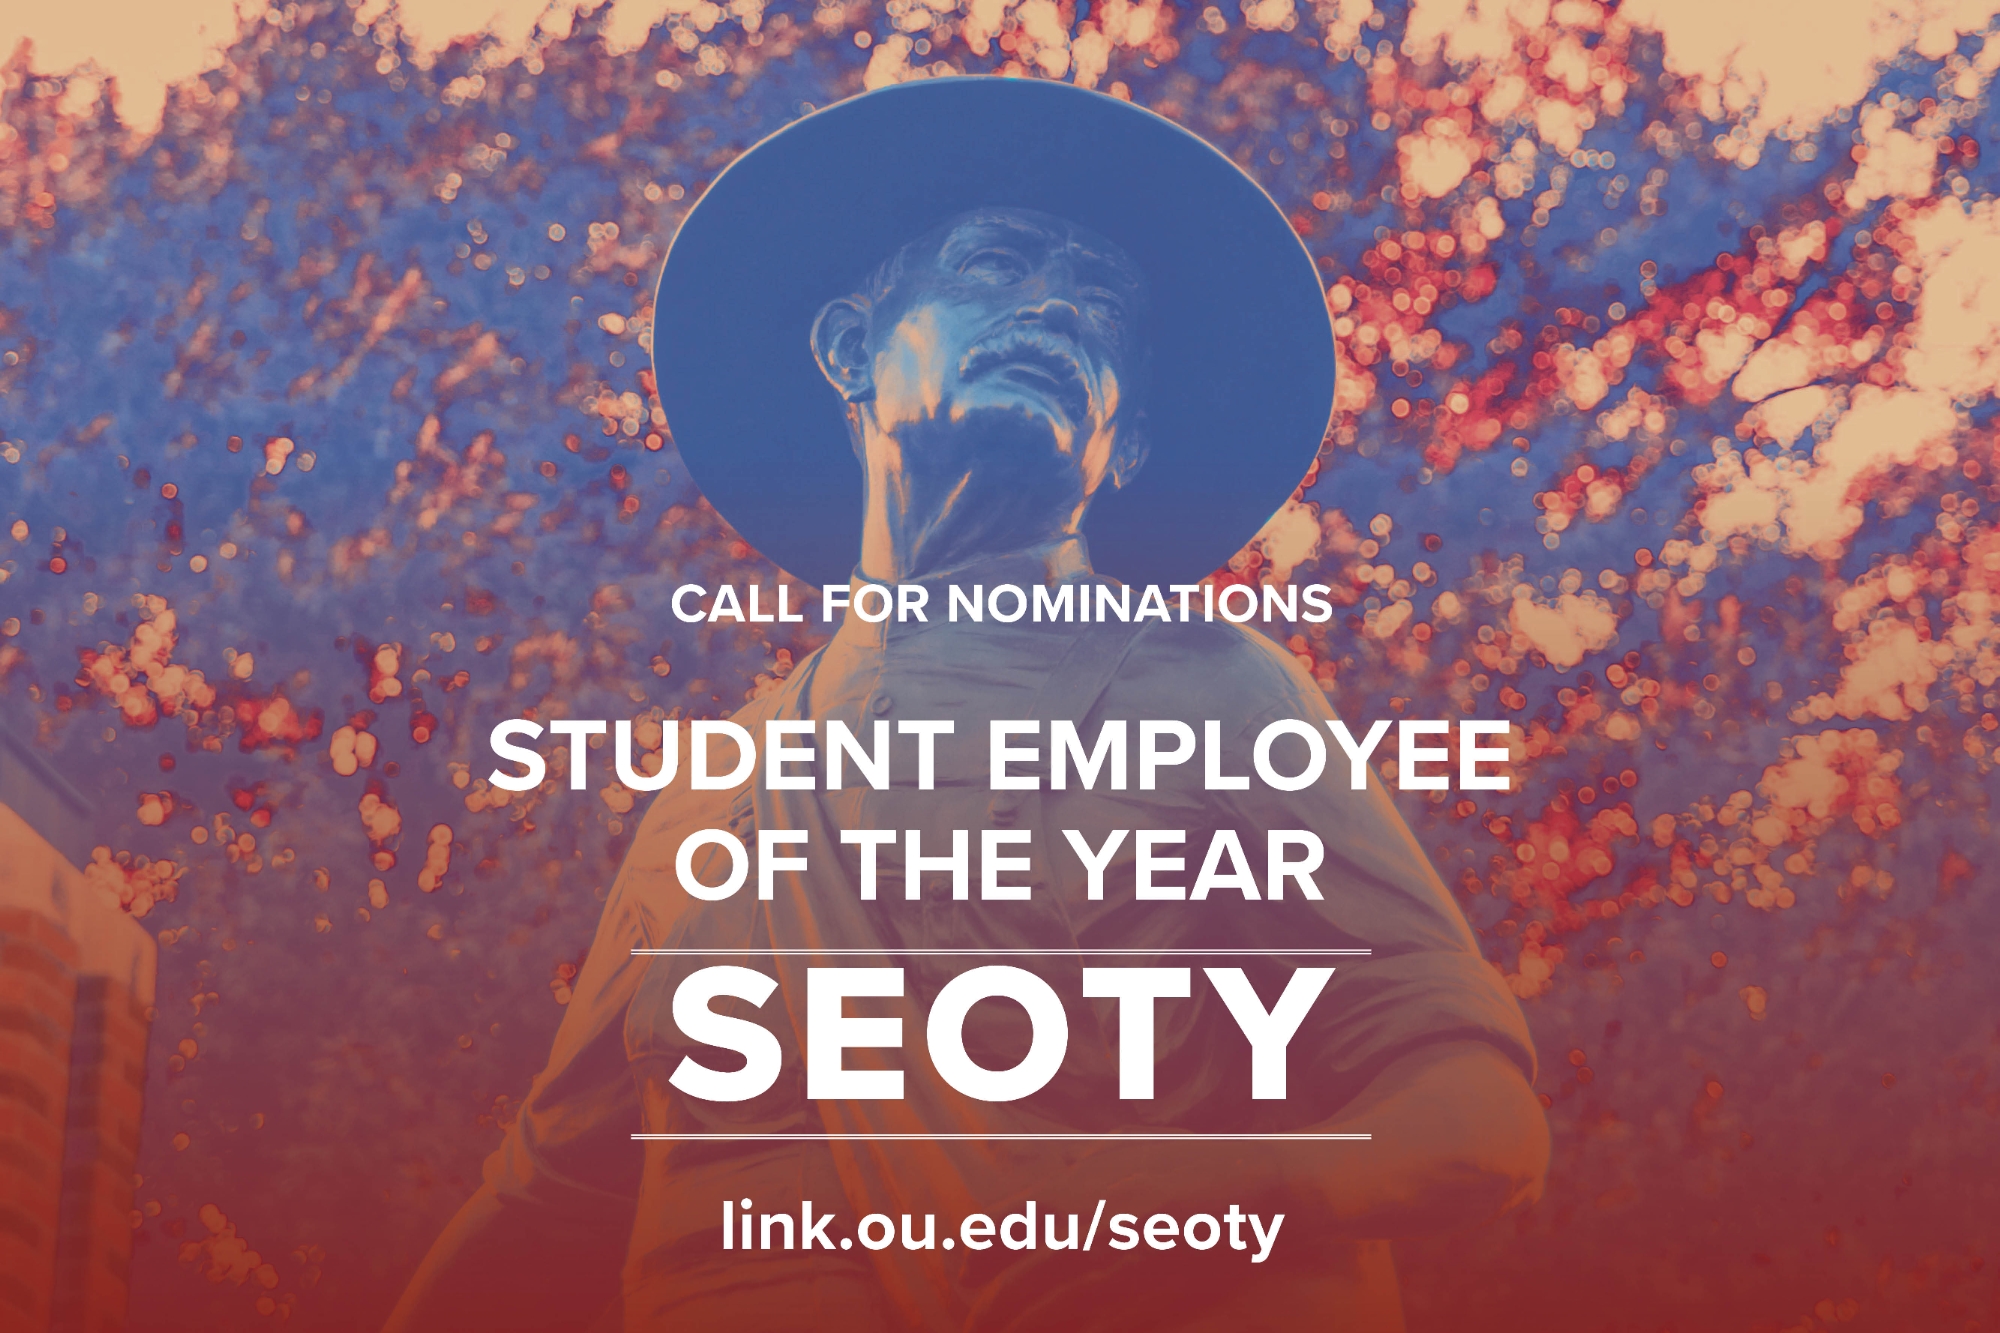 Call For Nominations SEOTY link.ou.edu/seoty text over stylized edit of a photo of the Seed Sower statue